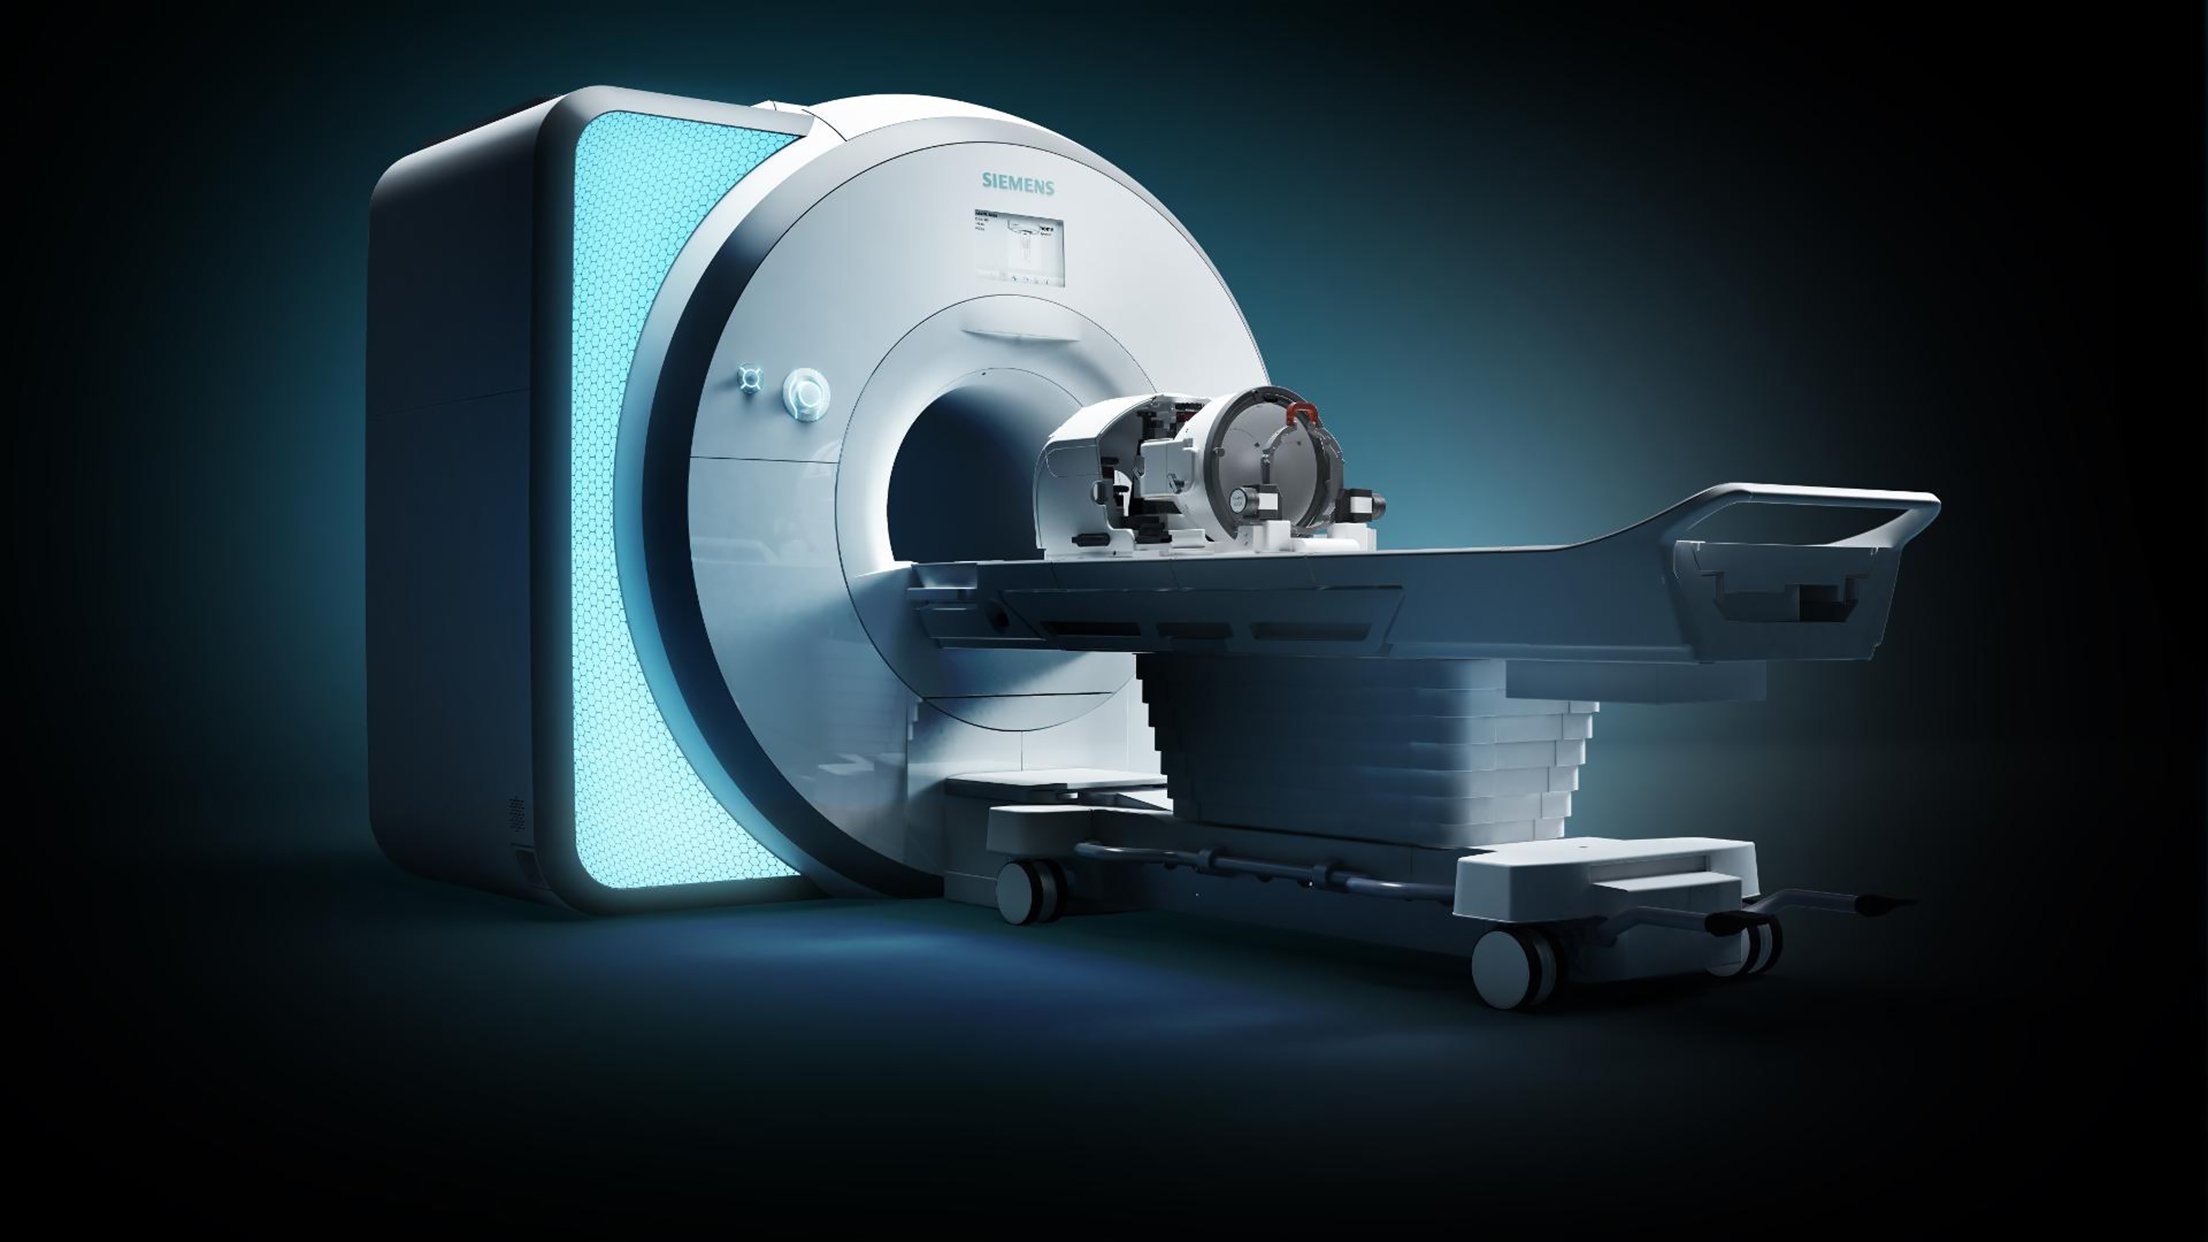 The Exablate Neuro is compatible with the Siemens Healthineers Magnetom Skyra, Prisma and Prisma Fit scanners. Exablate Neuro uses focused ultrasound for treatments deep within the brain with no surgical incisions. 